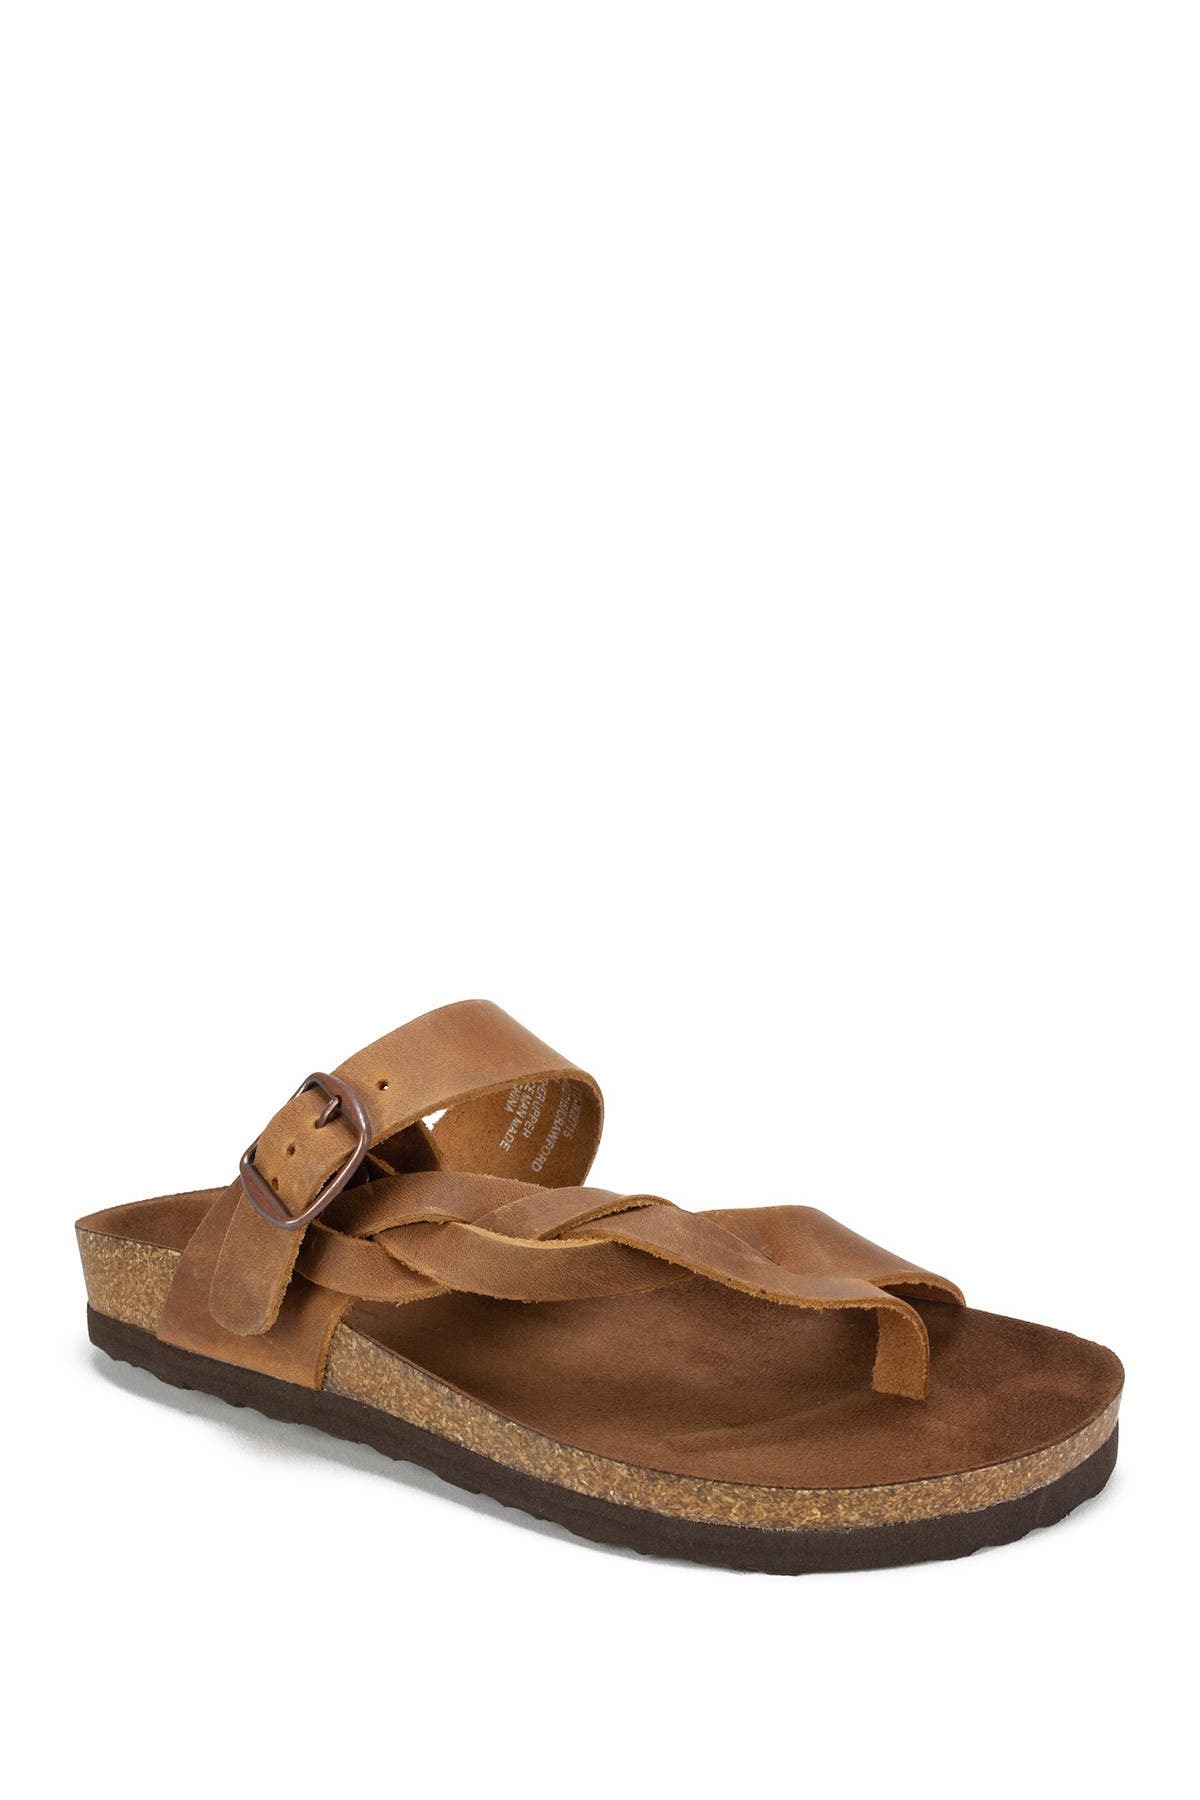 White Mountain Footwear Crawford Braided Footbed Sandal In Whiskey/leather